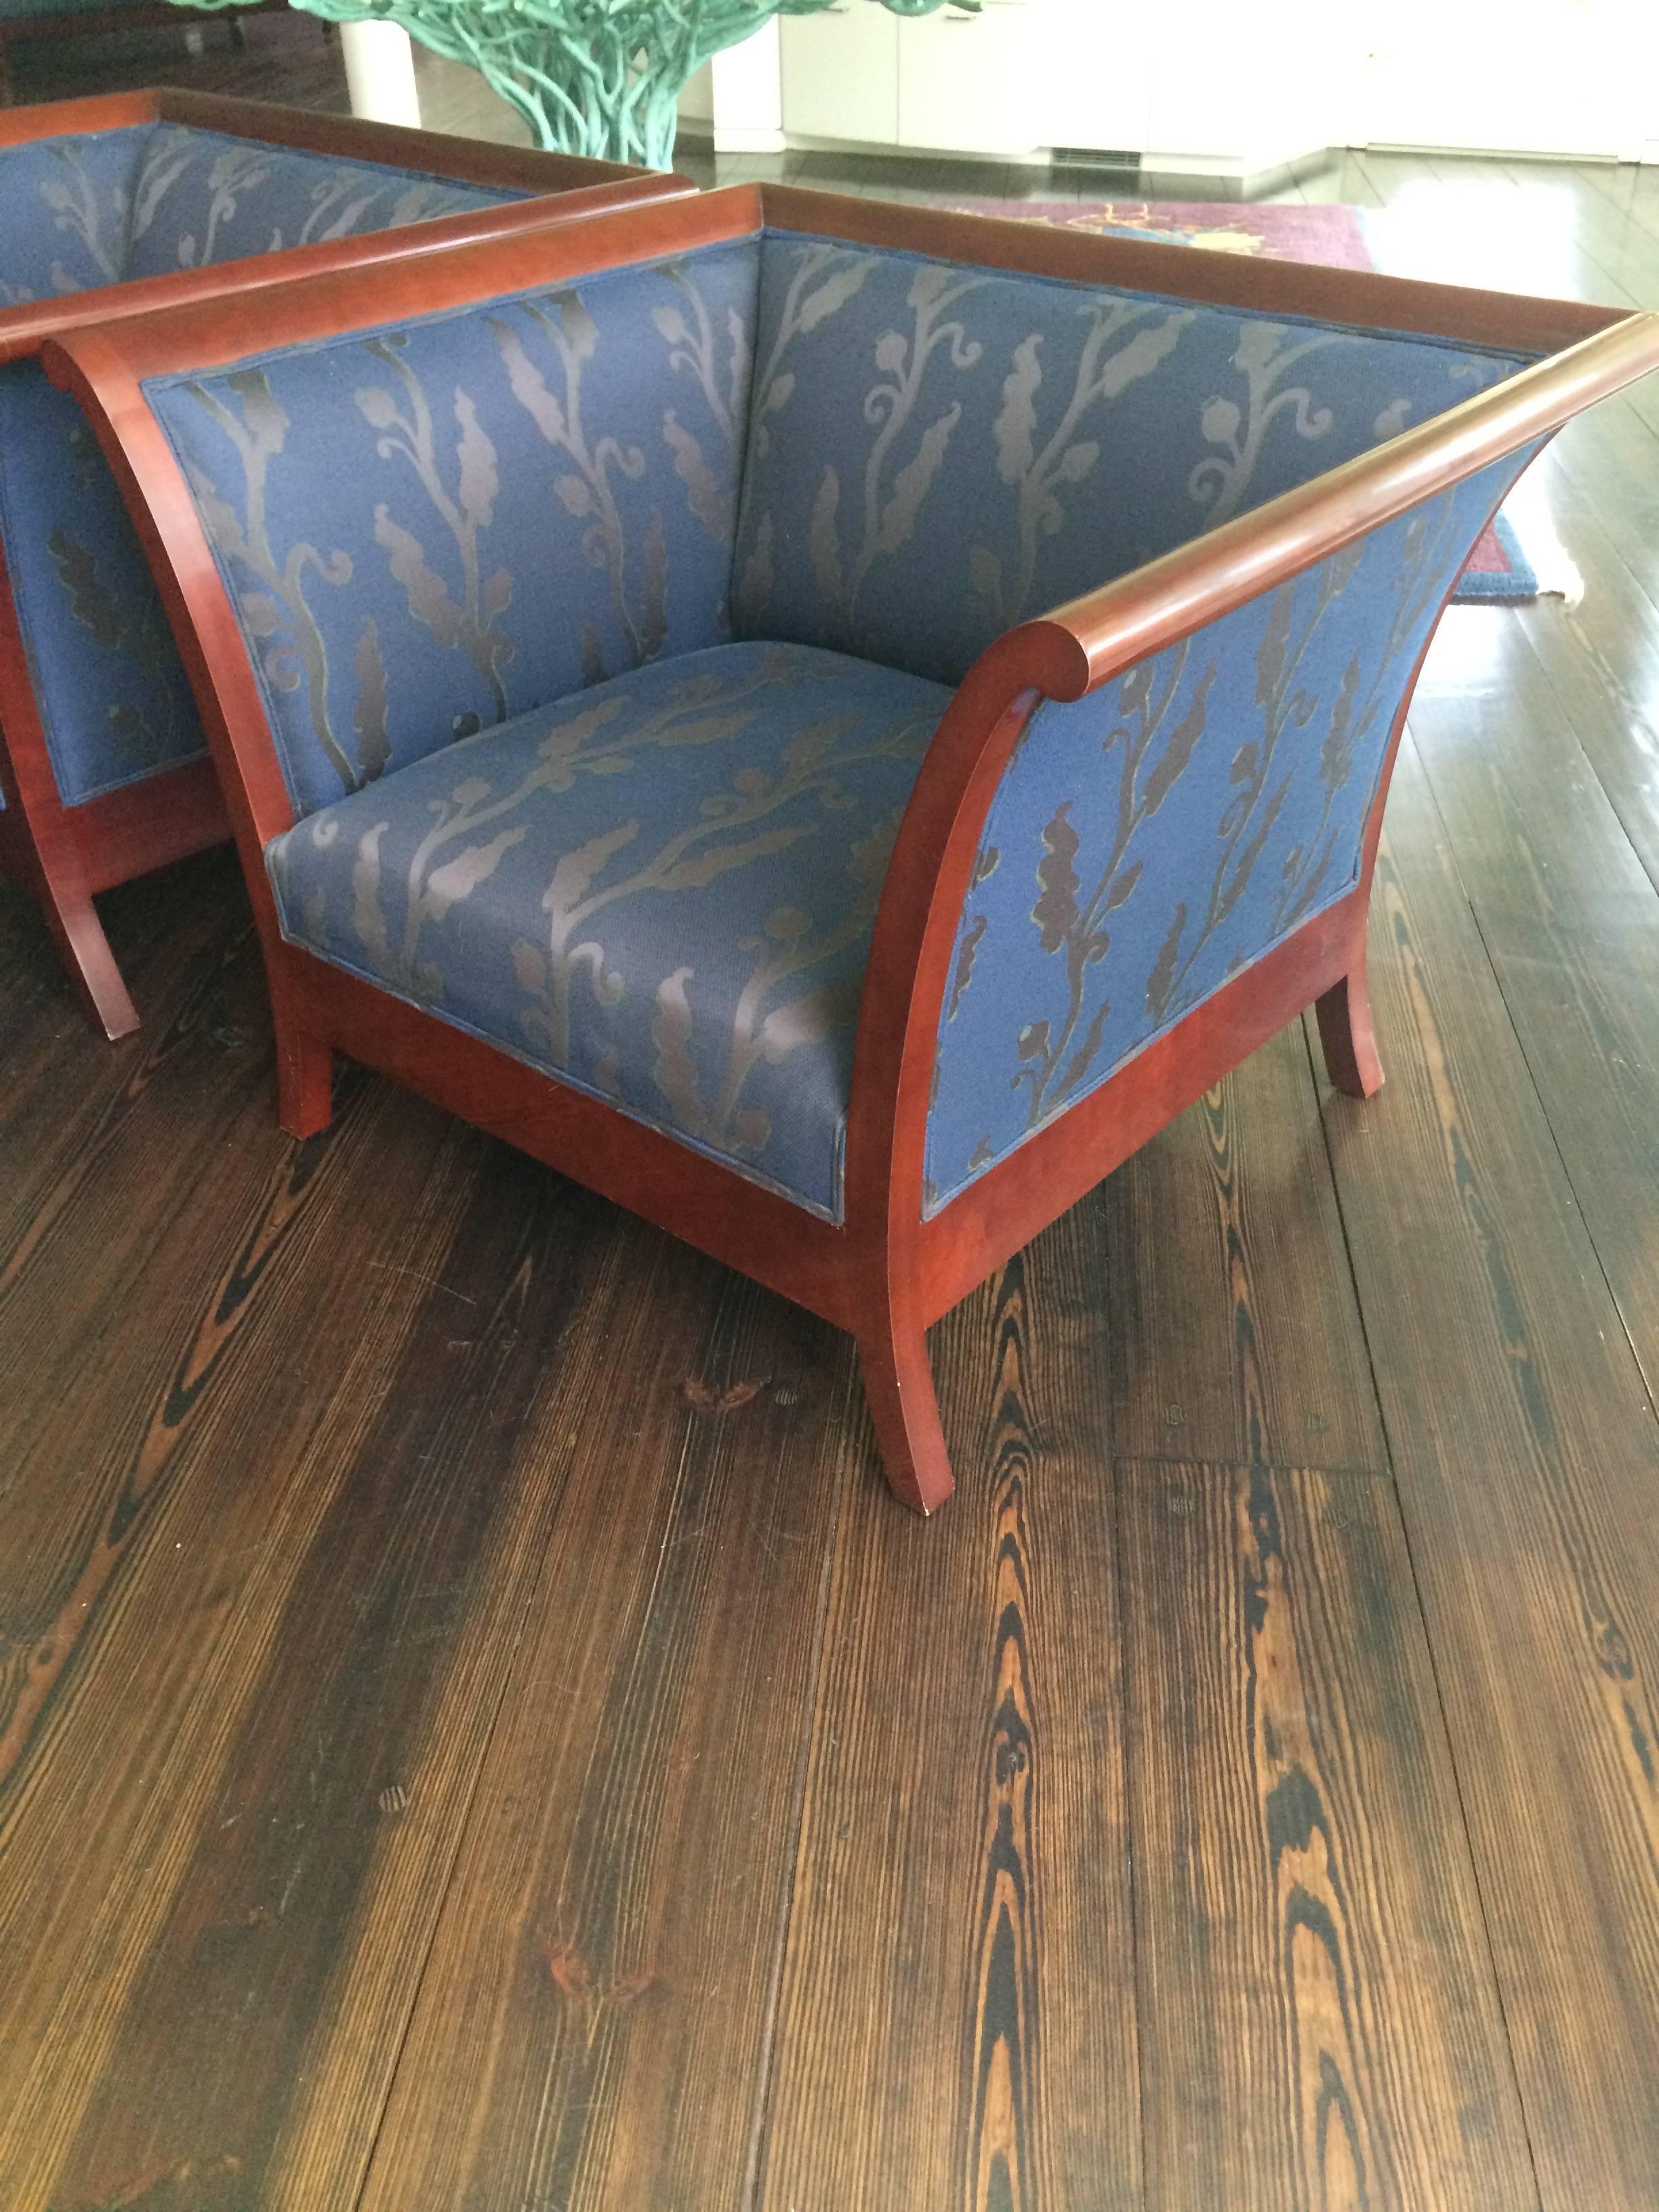 A pair of impressive mahogany Art Deco style club chairs, large, box shaped, with angular splayed arms and feet, upholstered in striking dark purple blue fabric for a firm comfy seat. By high end NYC furniture purveyor, Kenneth Winslow, from 20